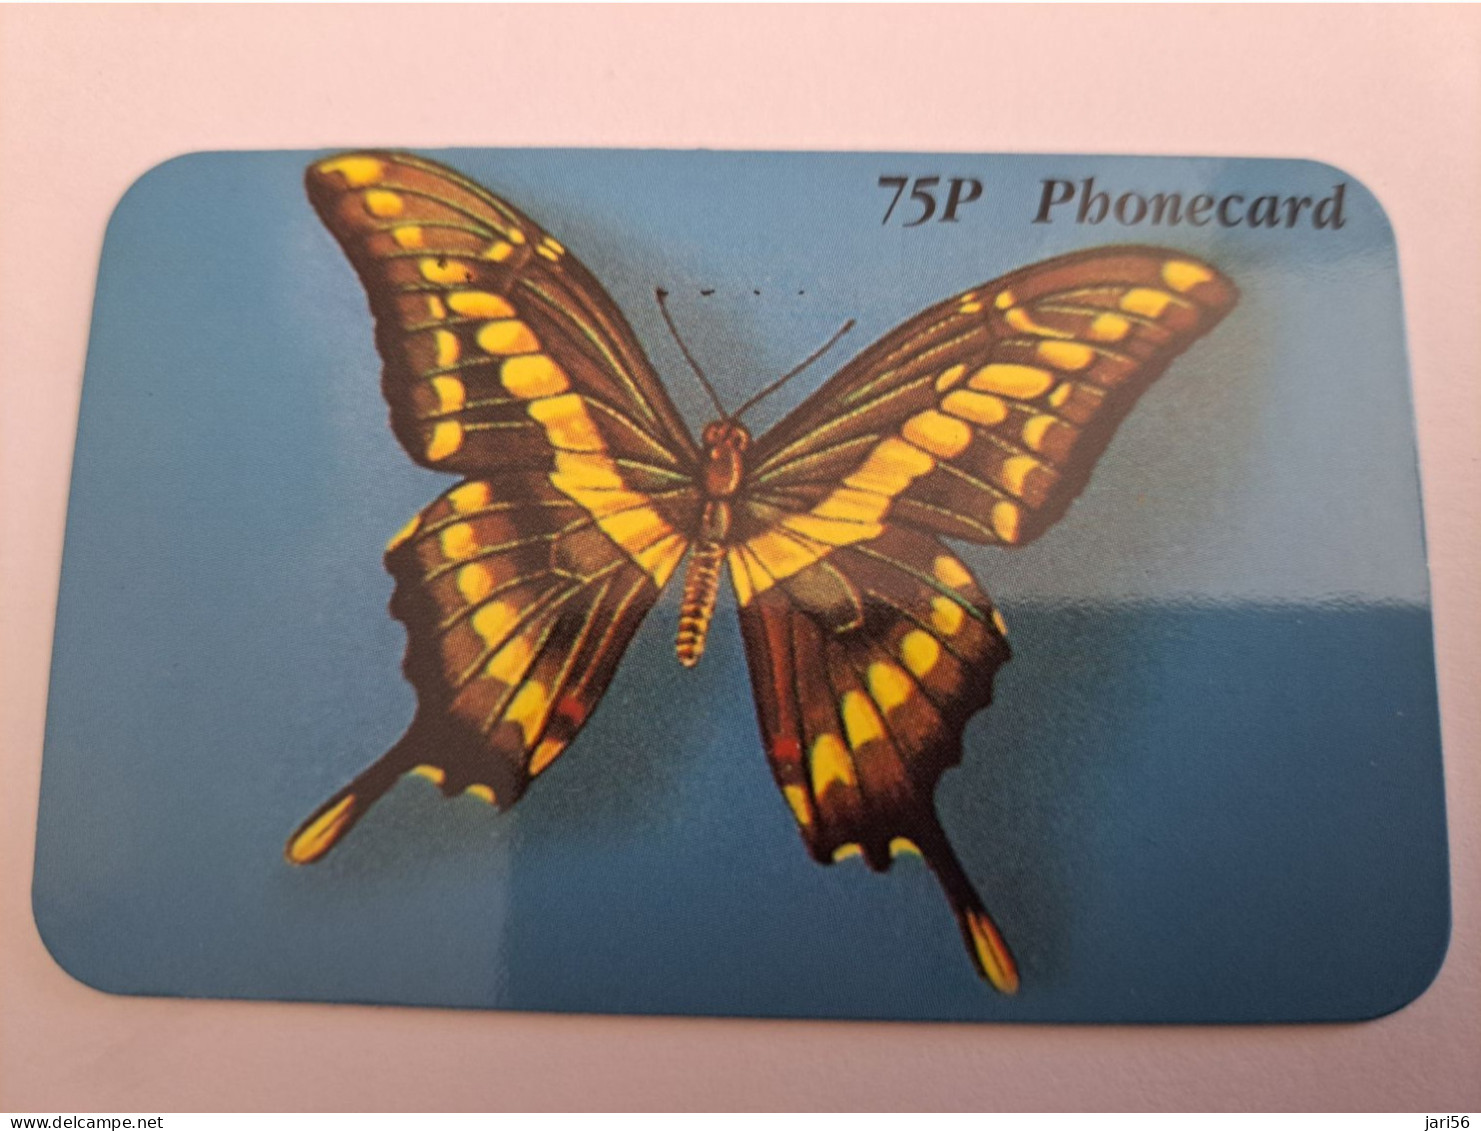 GREAT BRITAIN  / DISCOUNT PHONECARD/BUTTERFLY / 75 PENCE    PREPAID CARD / MINT      **13588** - [10] Colecciones